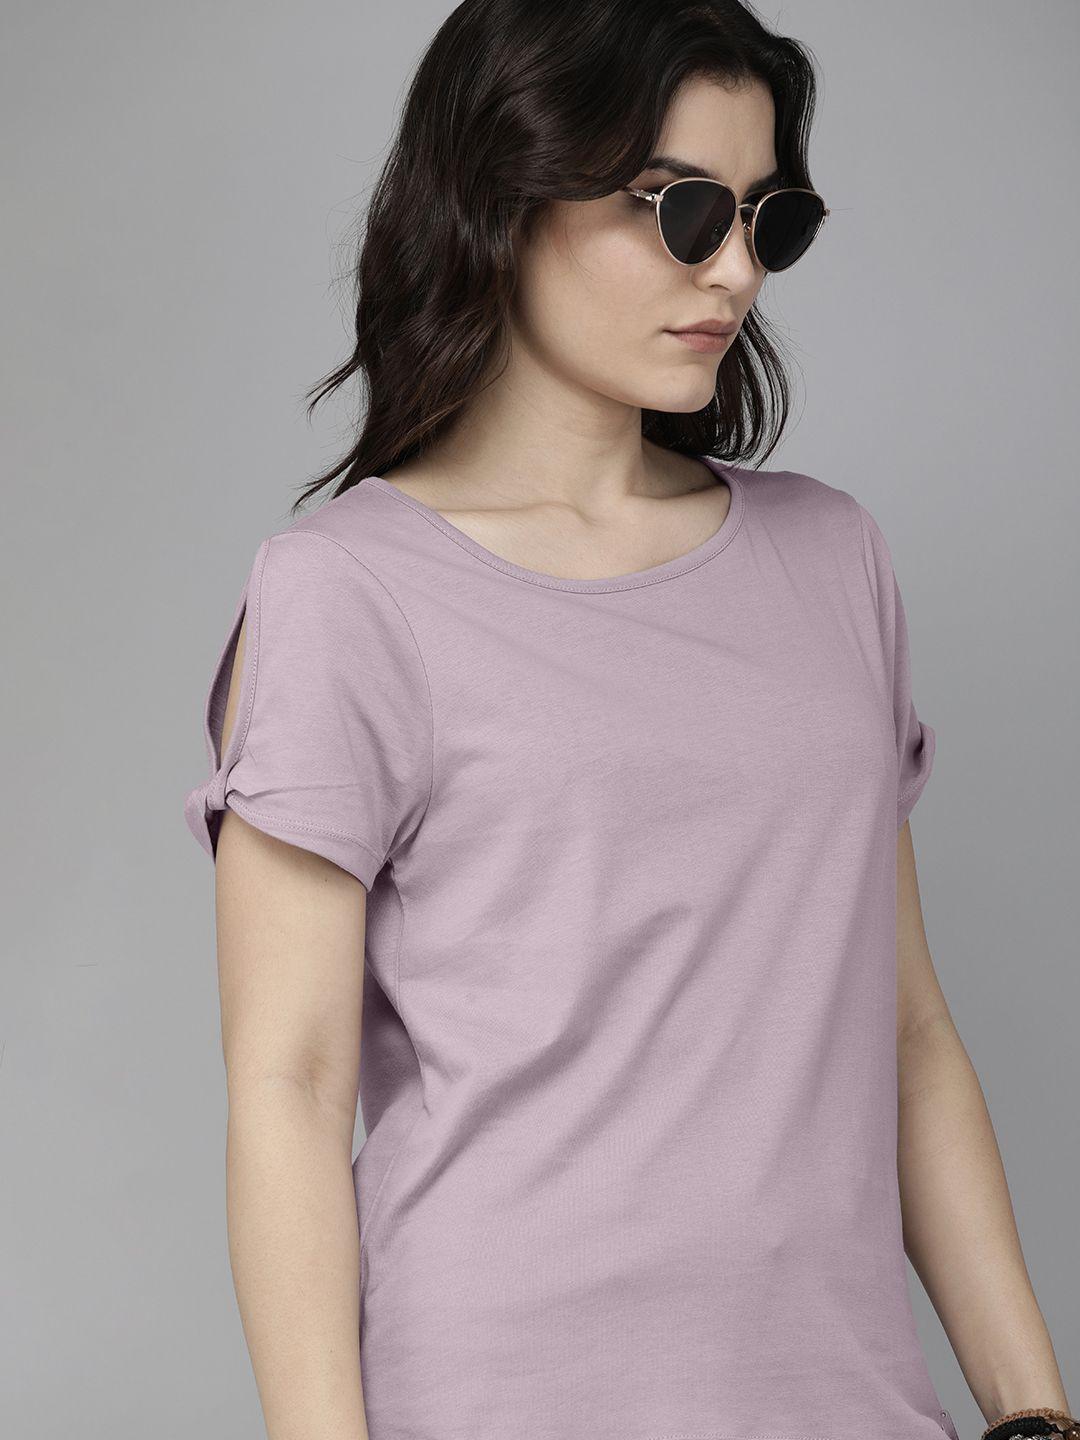 roadster women lavender solid round neck pure cotton t-shirt with slit sleeves